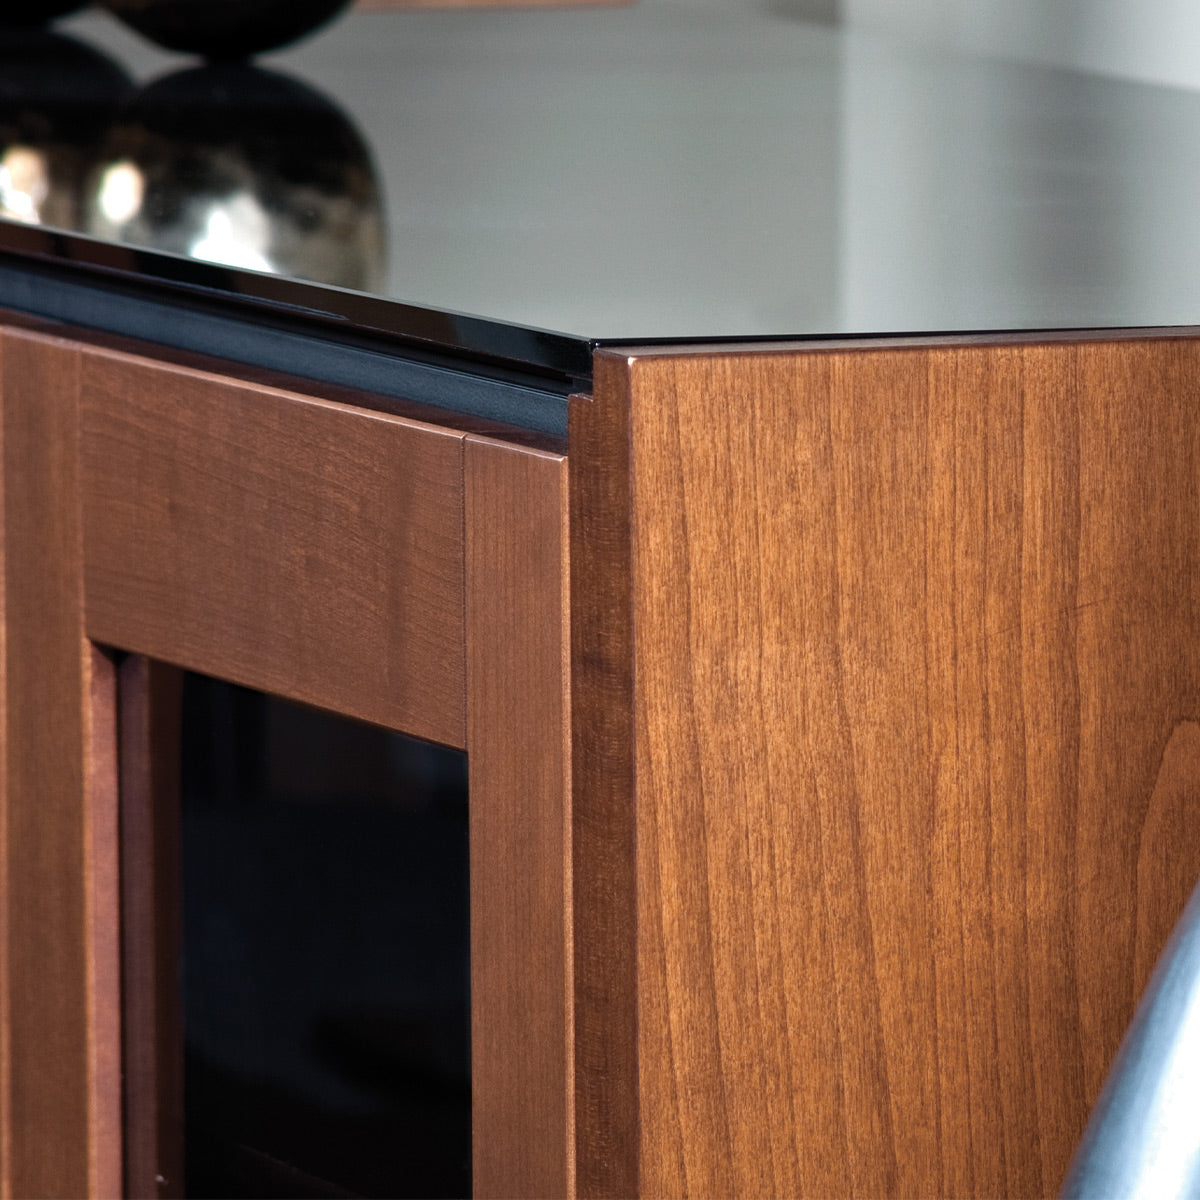 Salamander Chameleon Collection Corsica 217 AV Cabinet (Thick Cherry with Black Glass Top)